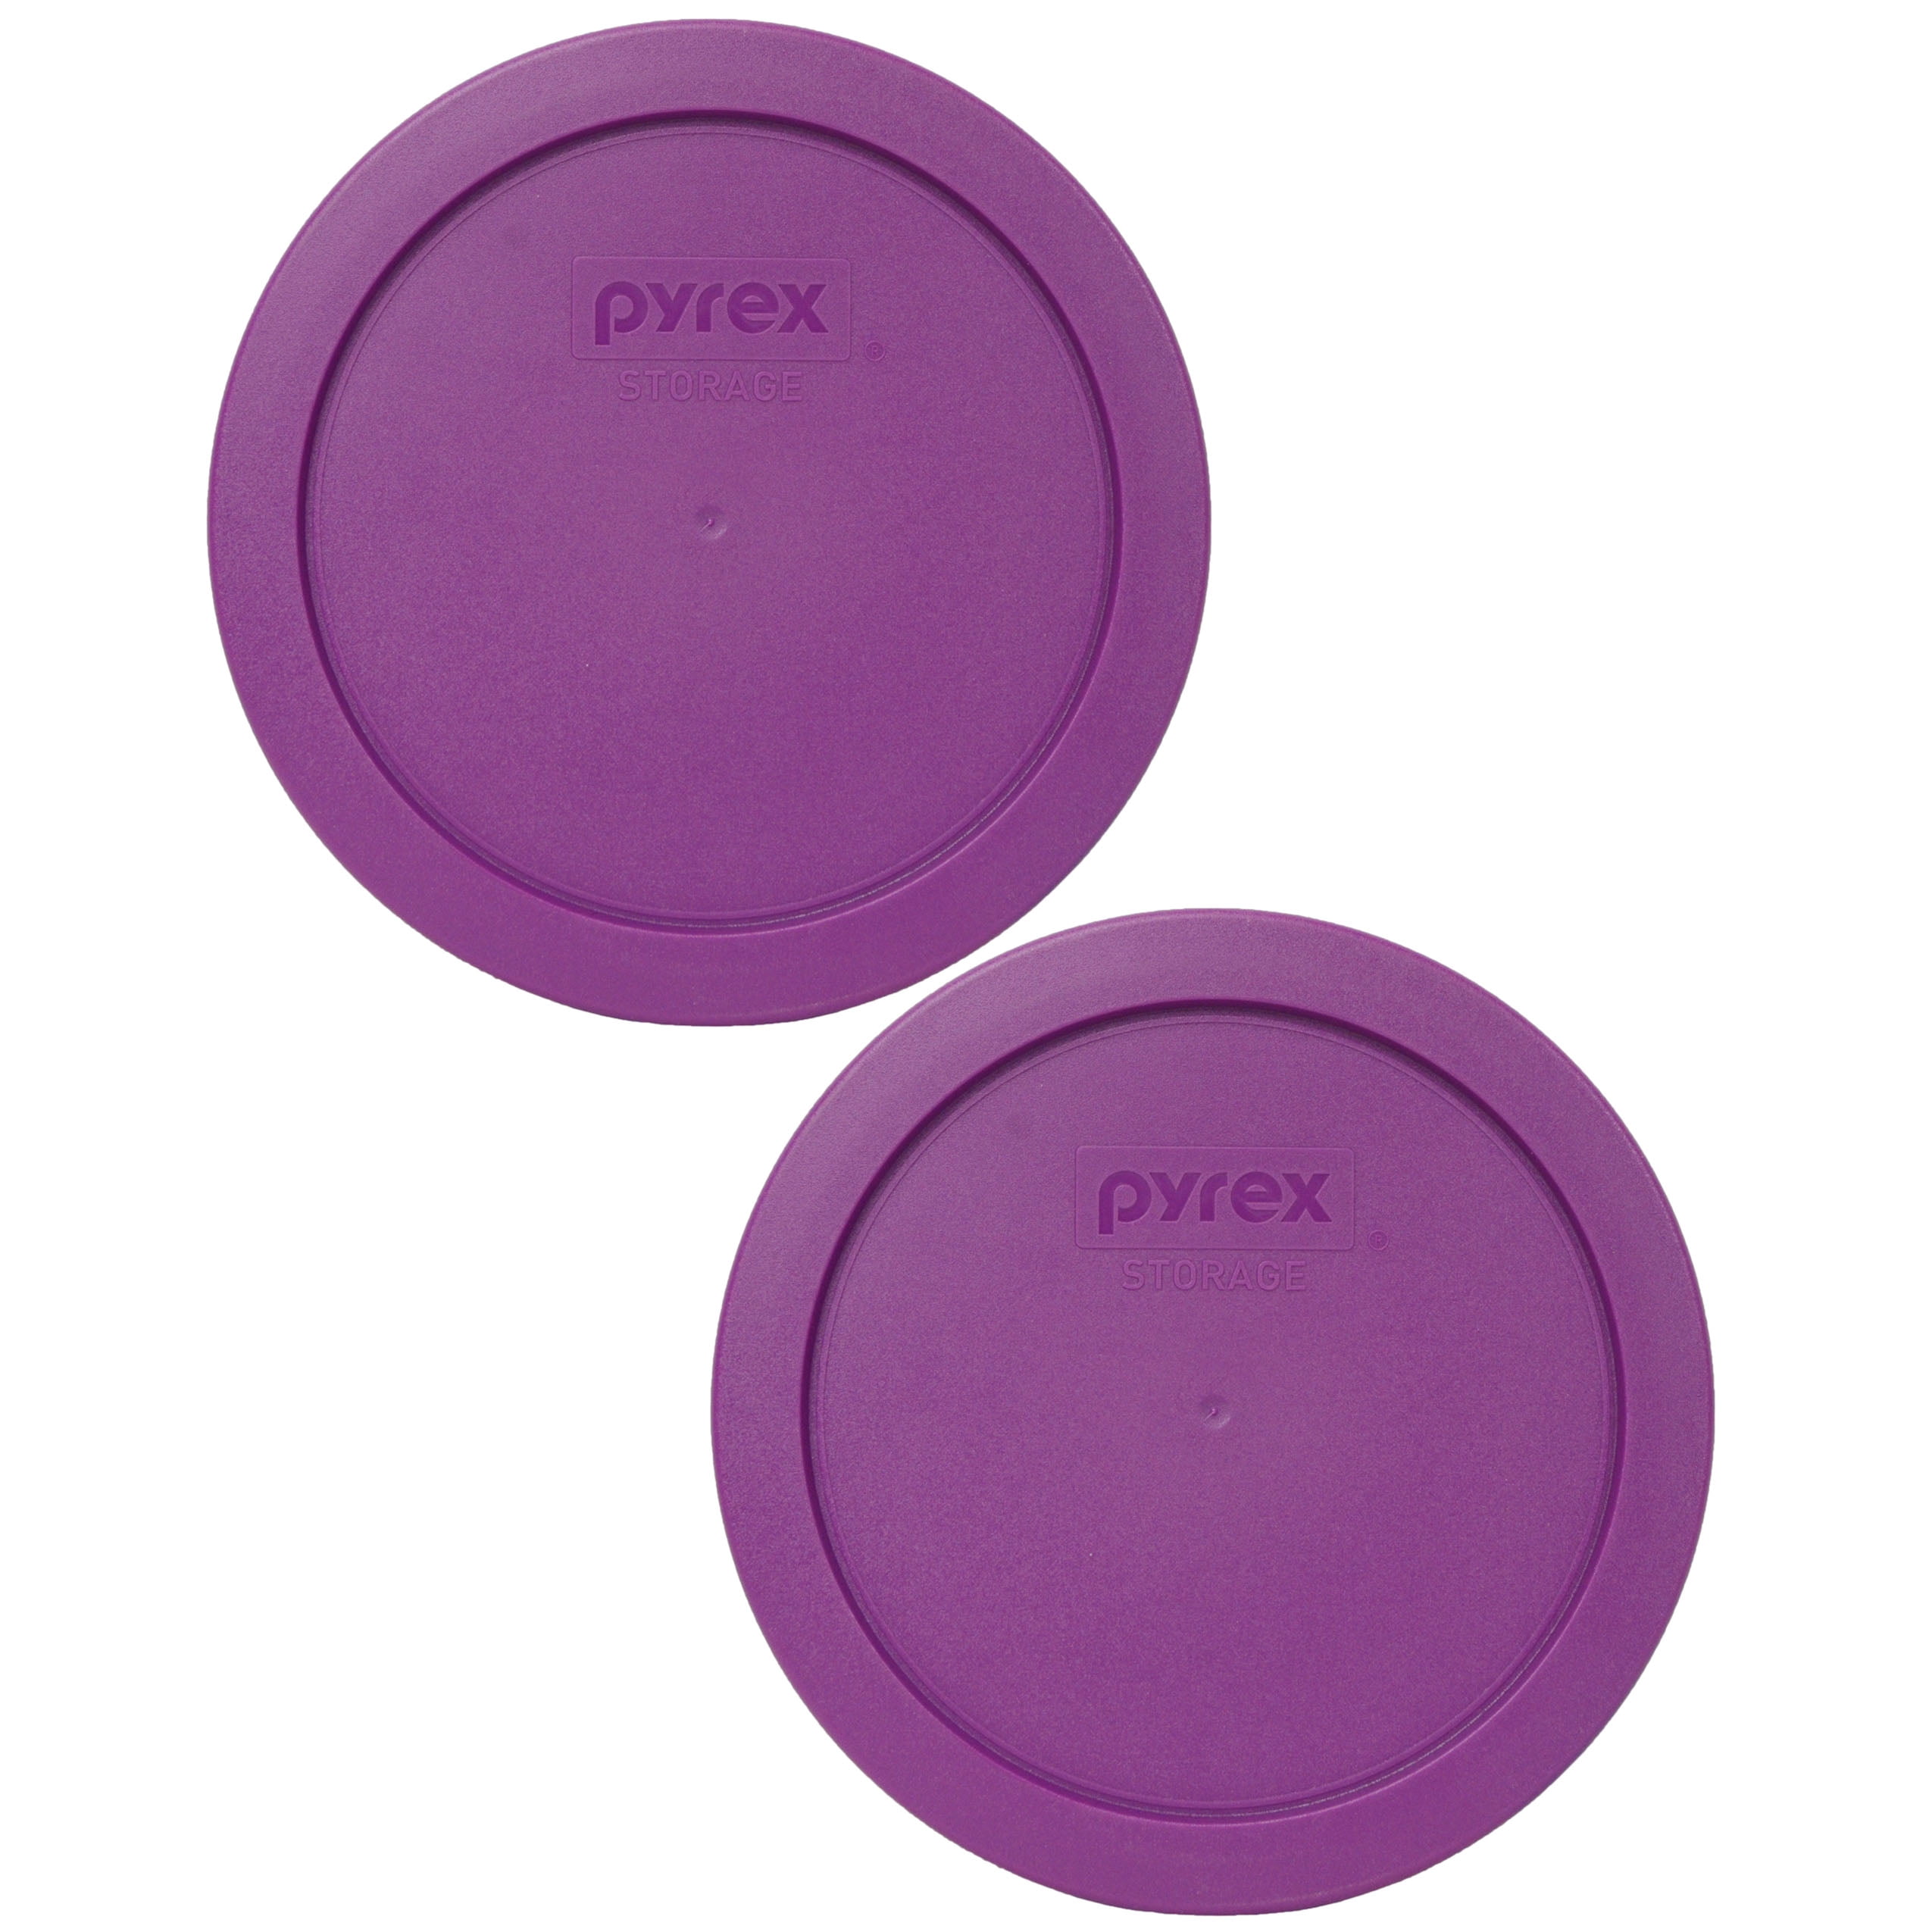 Pyrex 7201-PC Thistle Purple Plastic Storage Replacement Lid Cover 6-Pack 